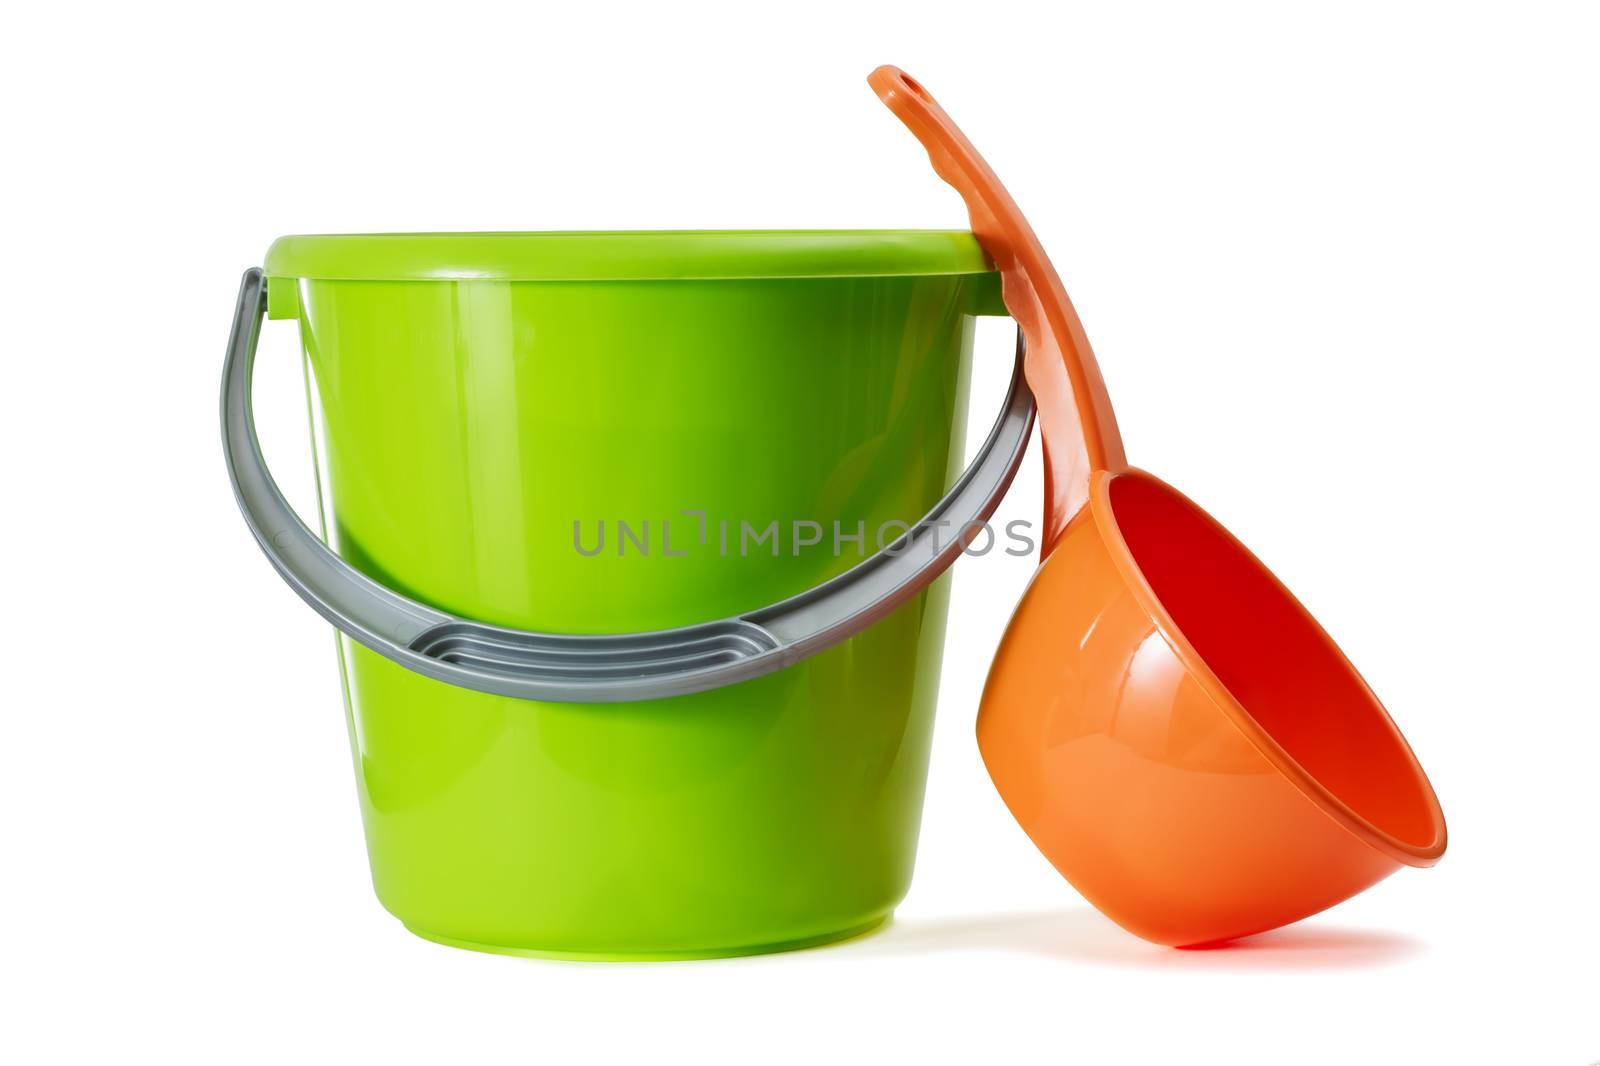 Bucket and ladle by Ohotnik